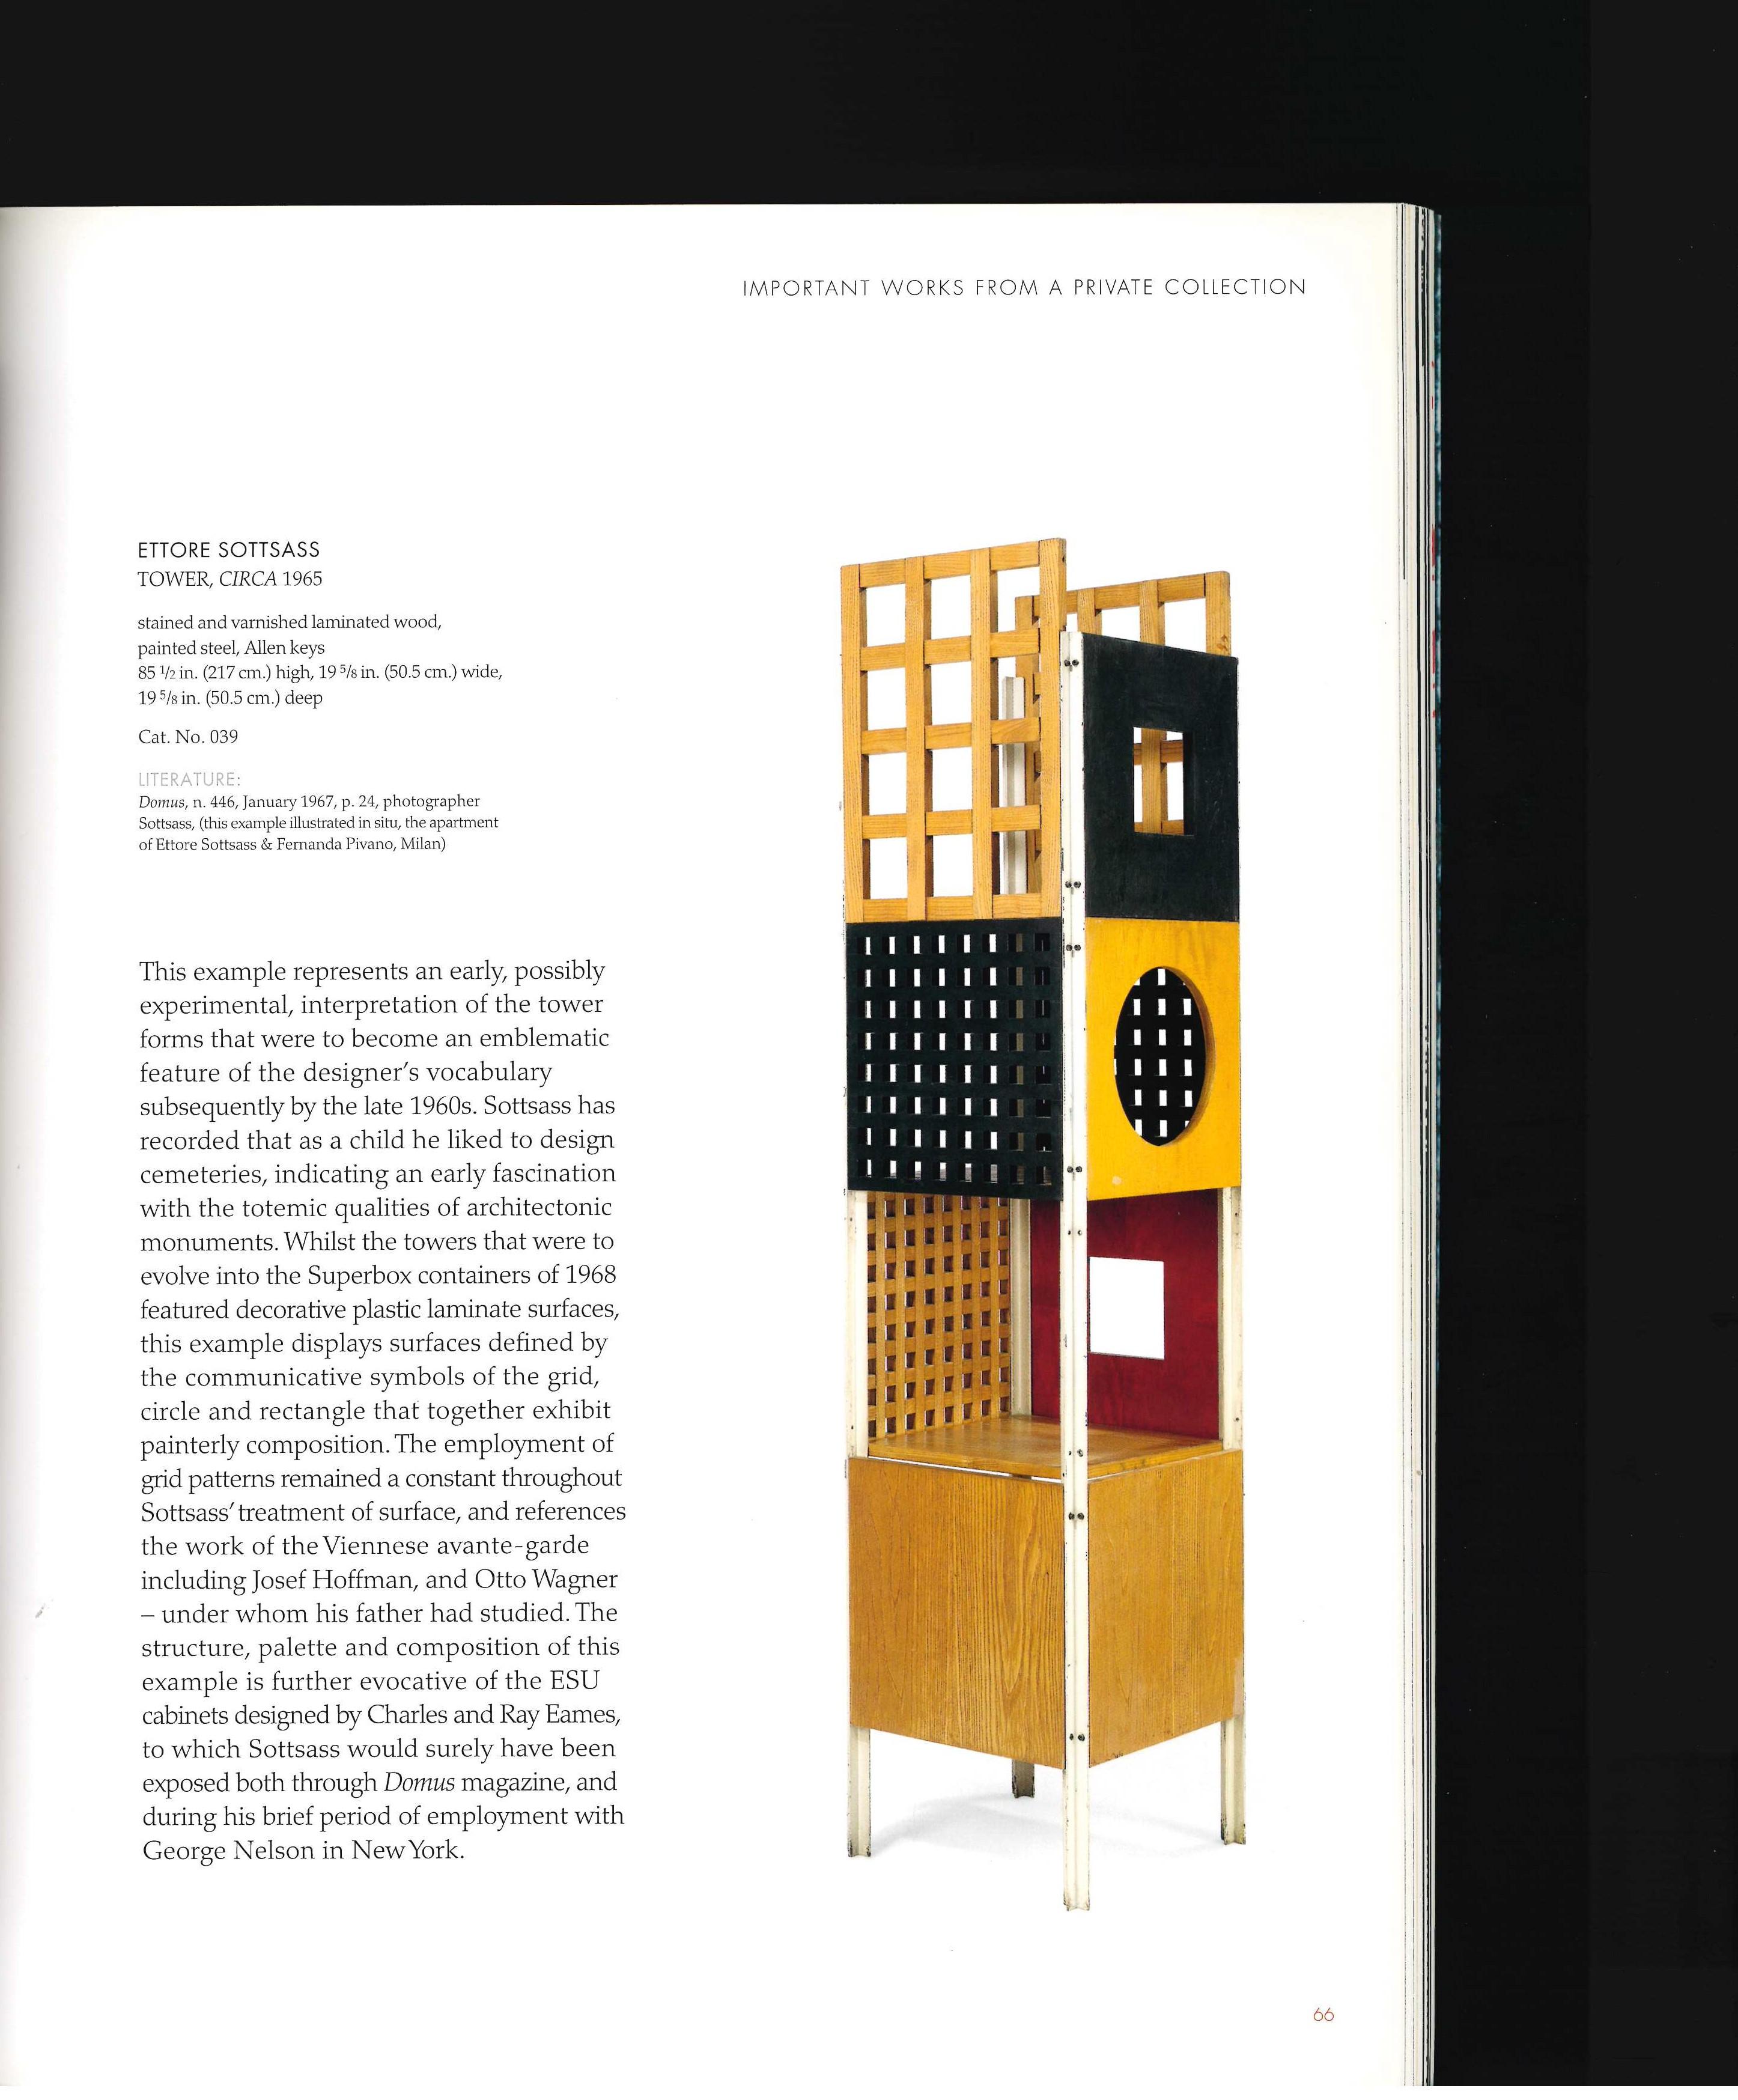 Ettore Sottsass: Important Works from a Private Collection, Christie's (Book) 2